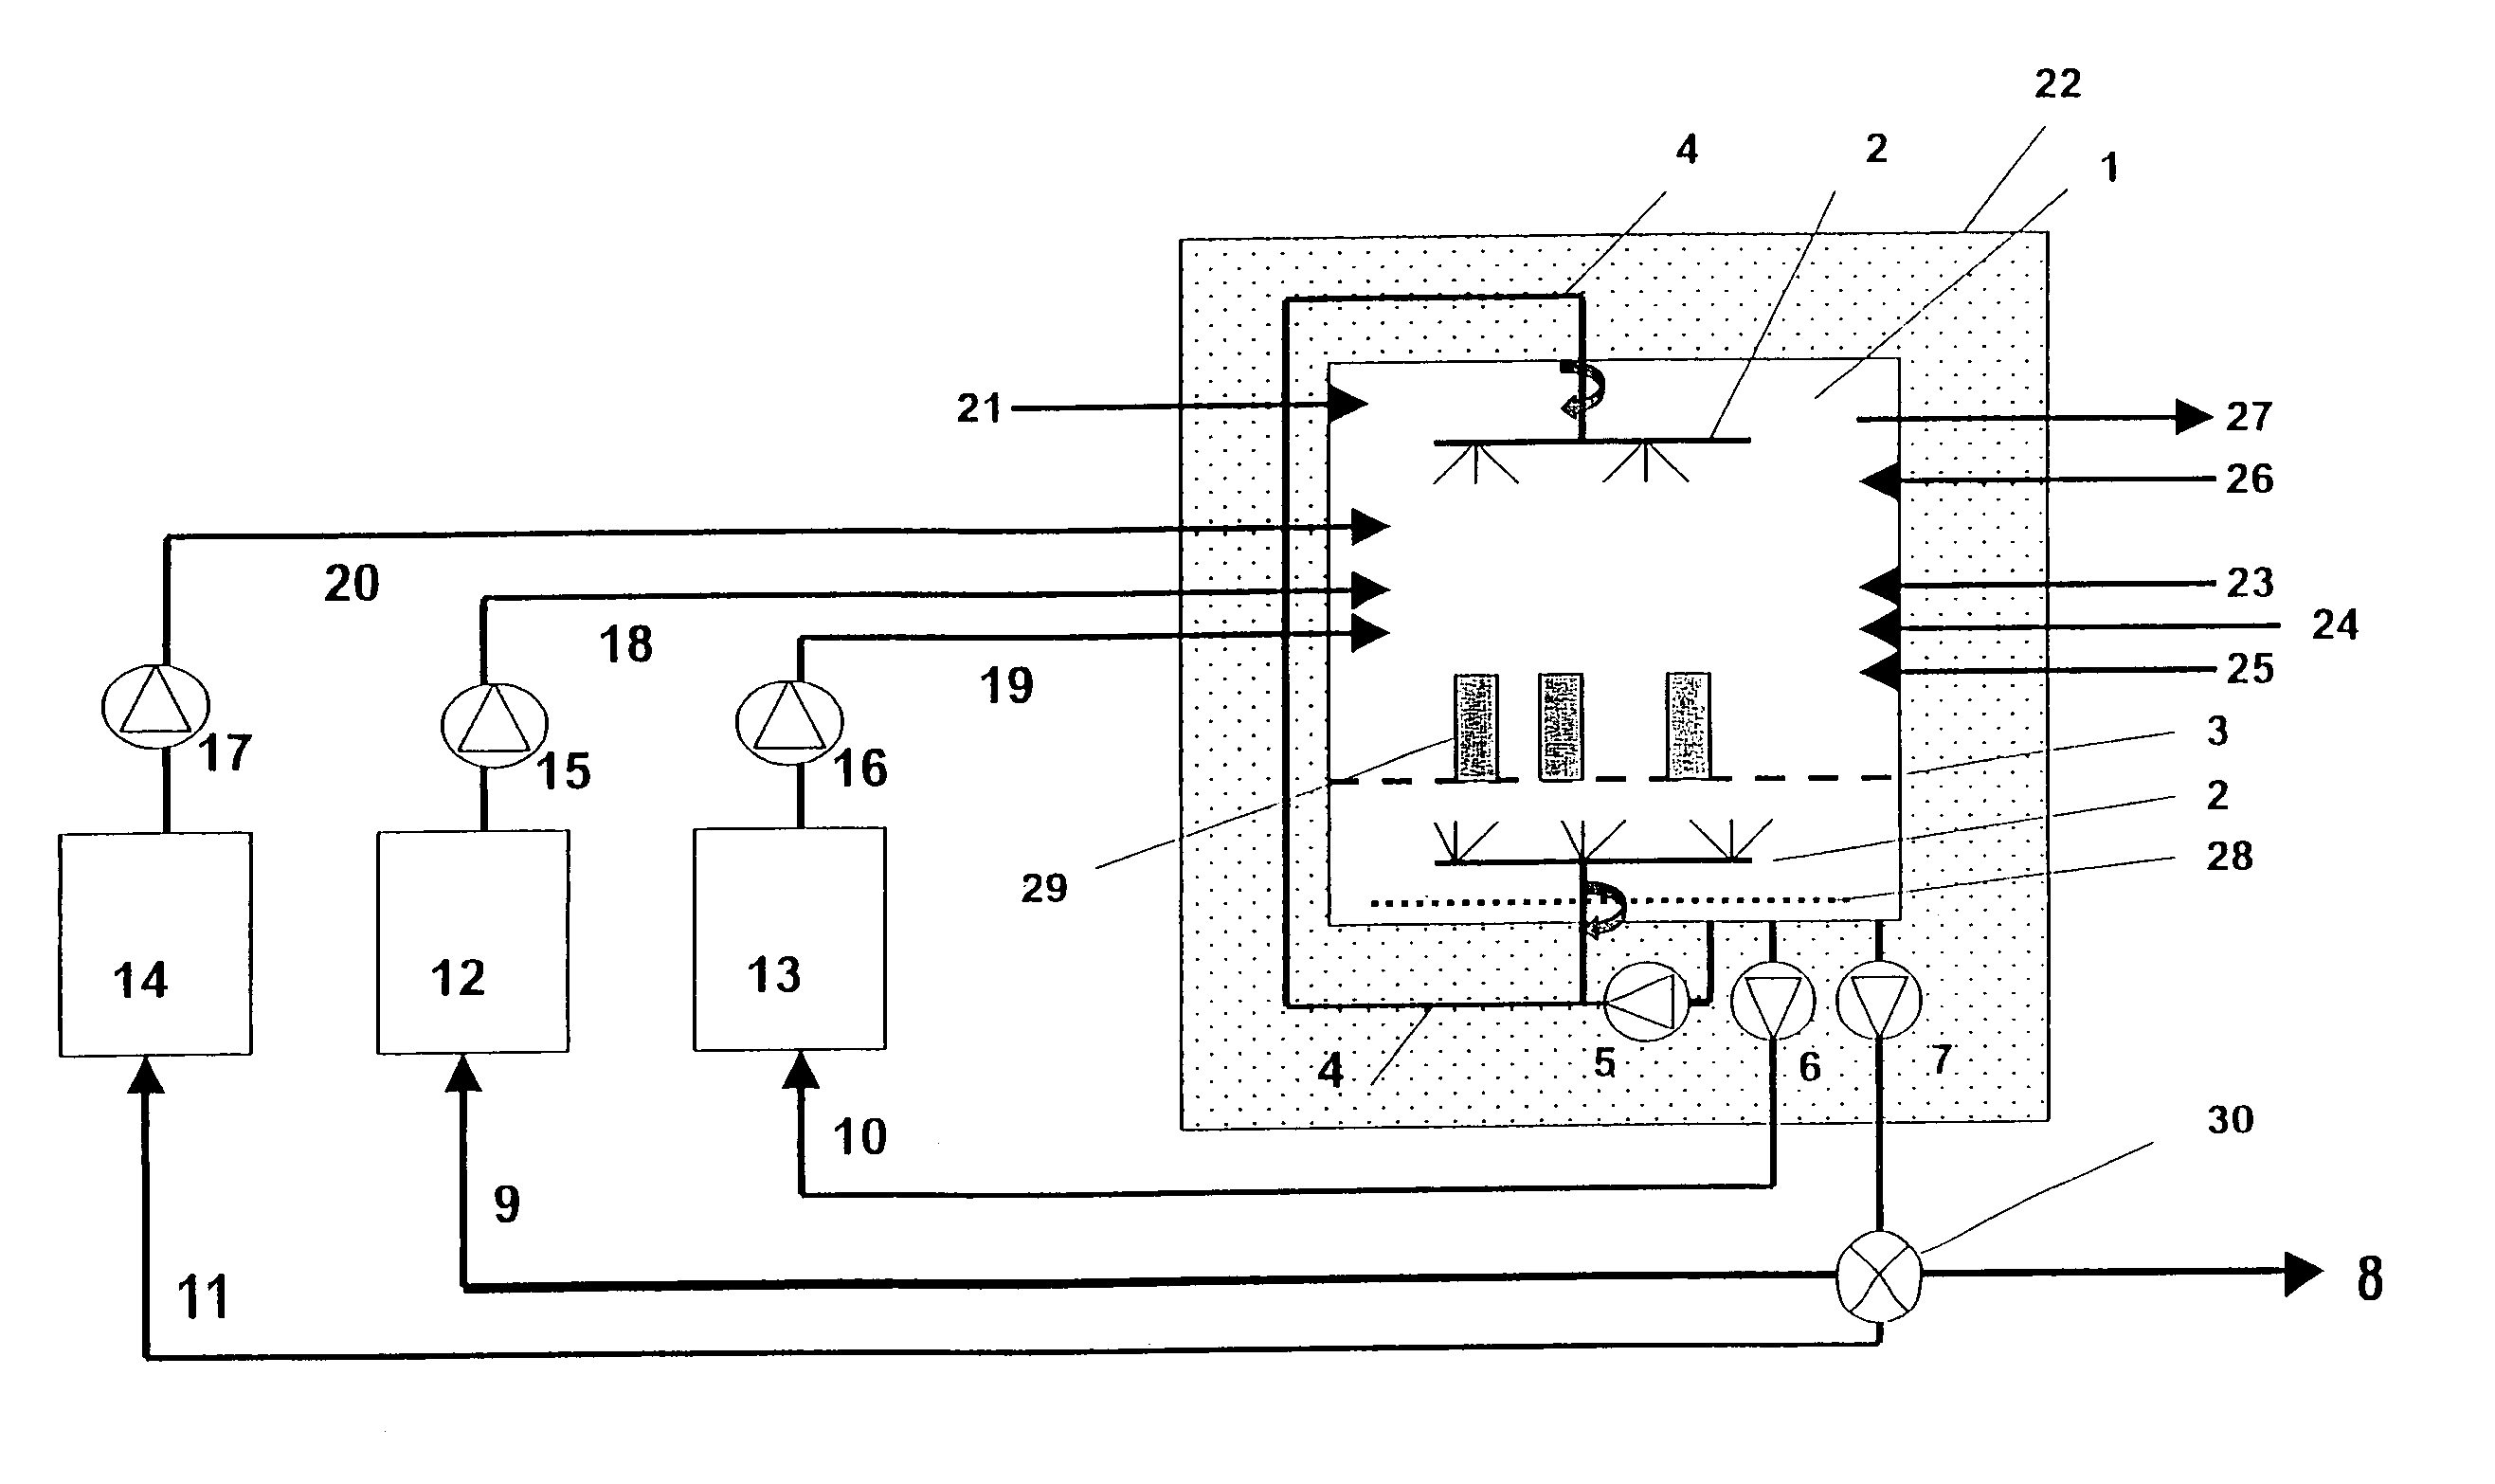 Stripping apparatus and method for removal of coatings on metal surfaces